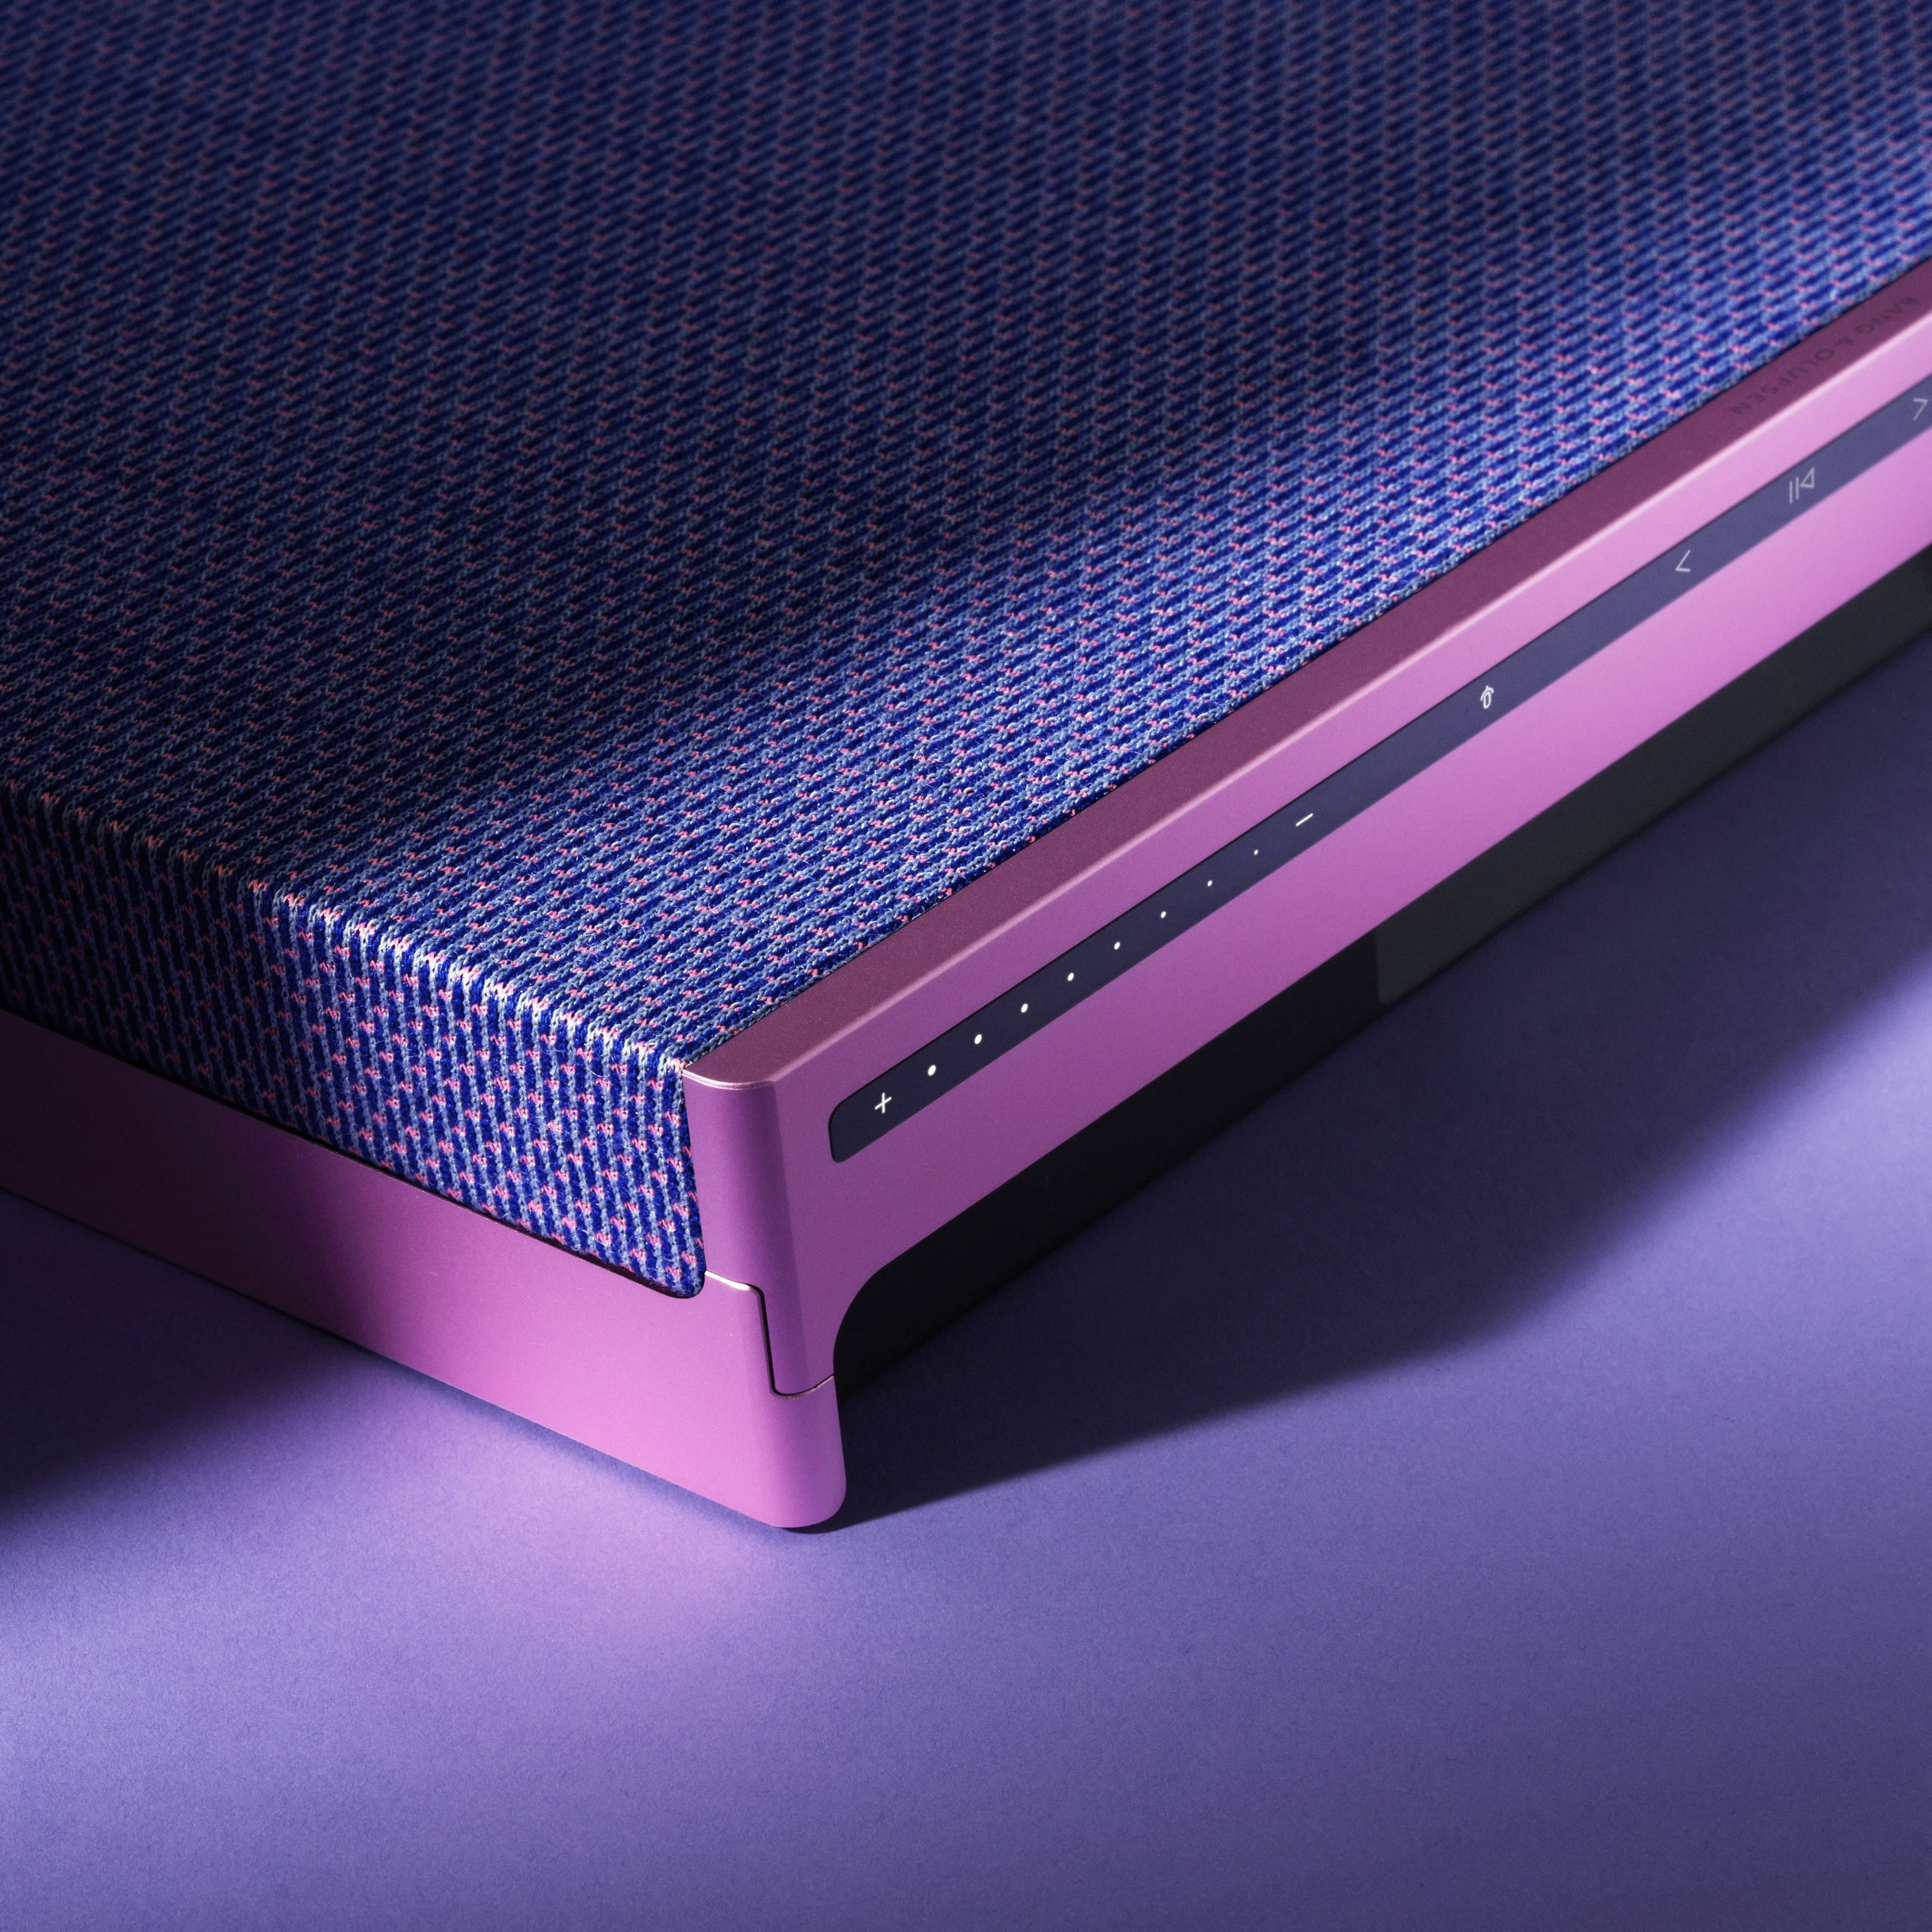 Detail image of the corner and control panel of a Beosound Level speaker in the limited colour Lilac Twilight